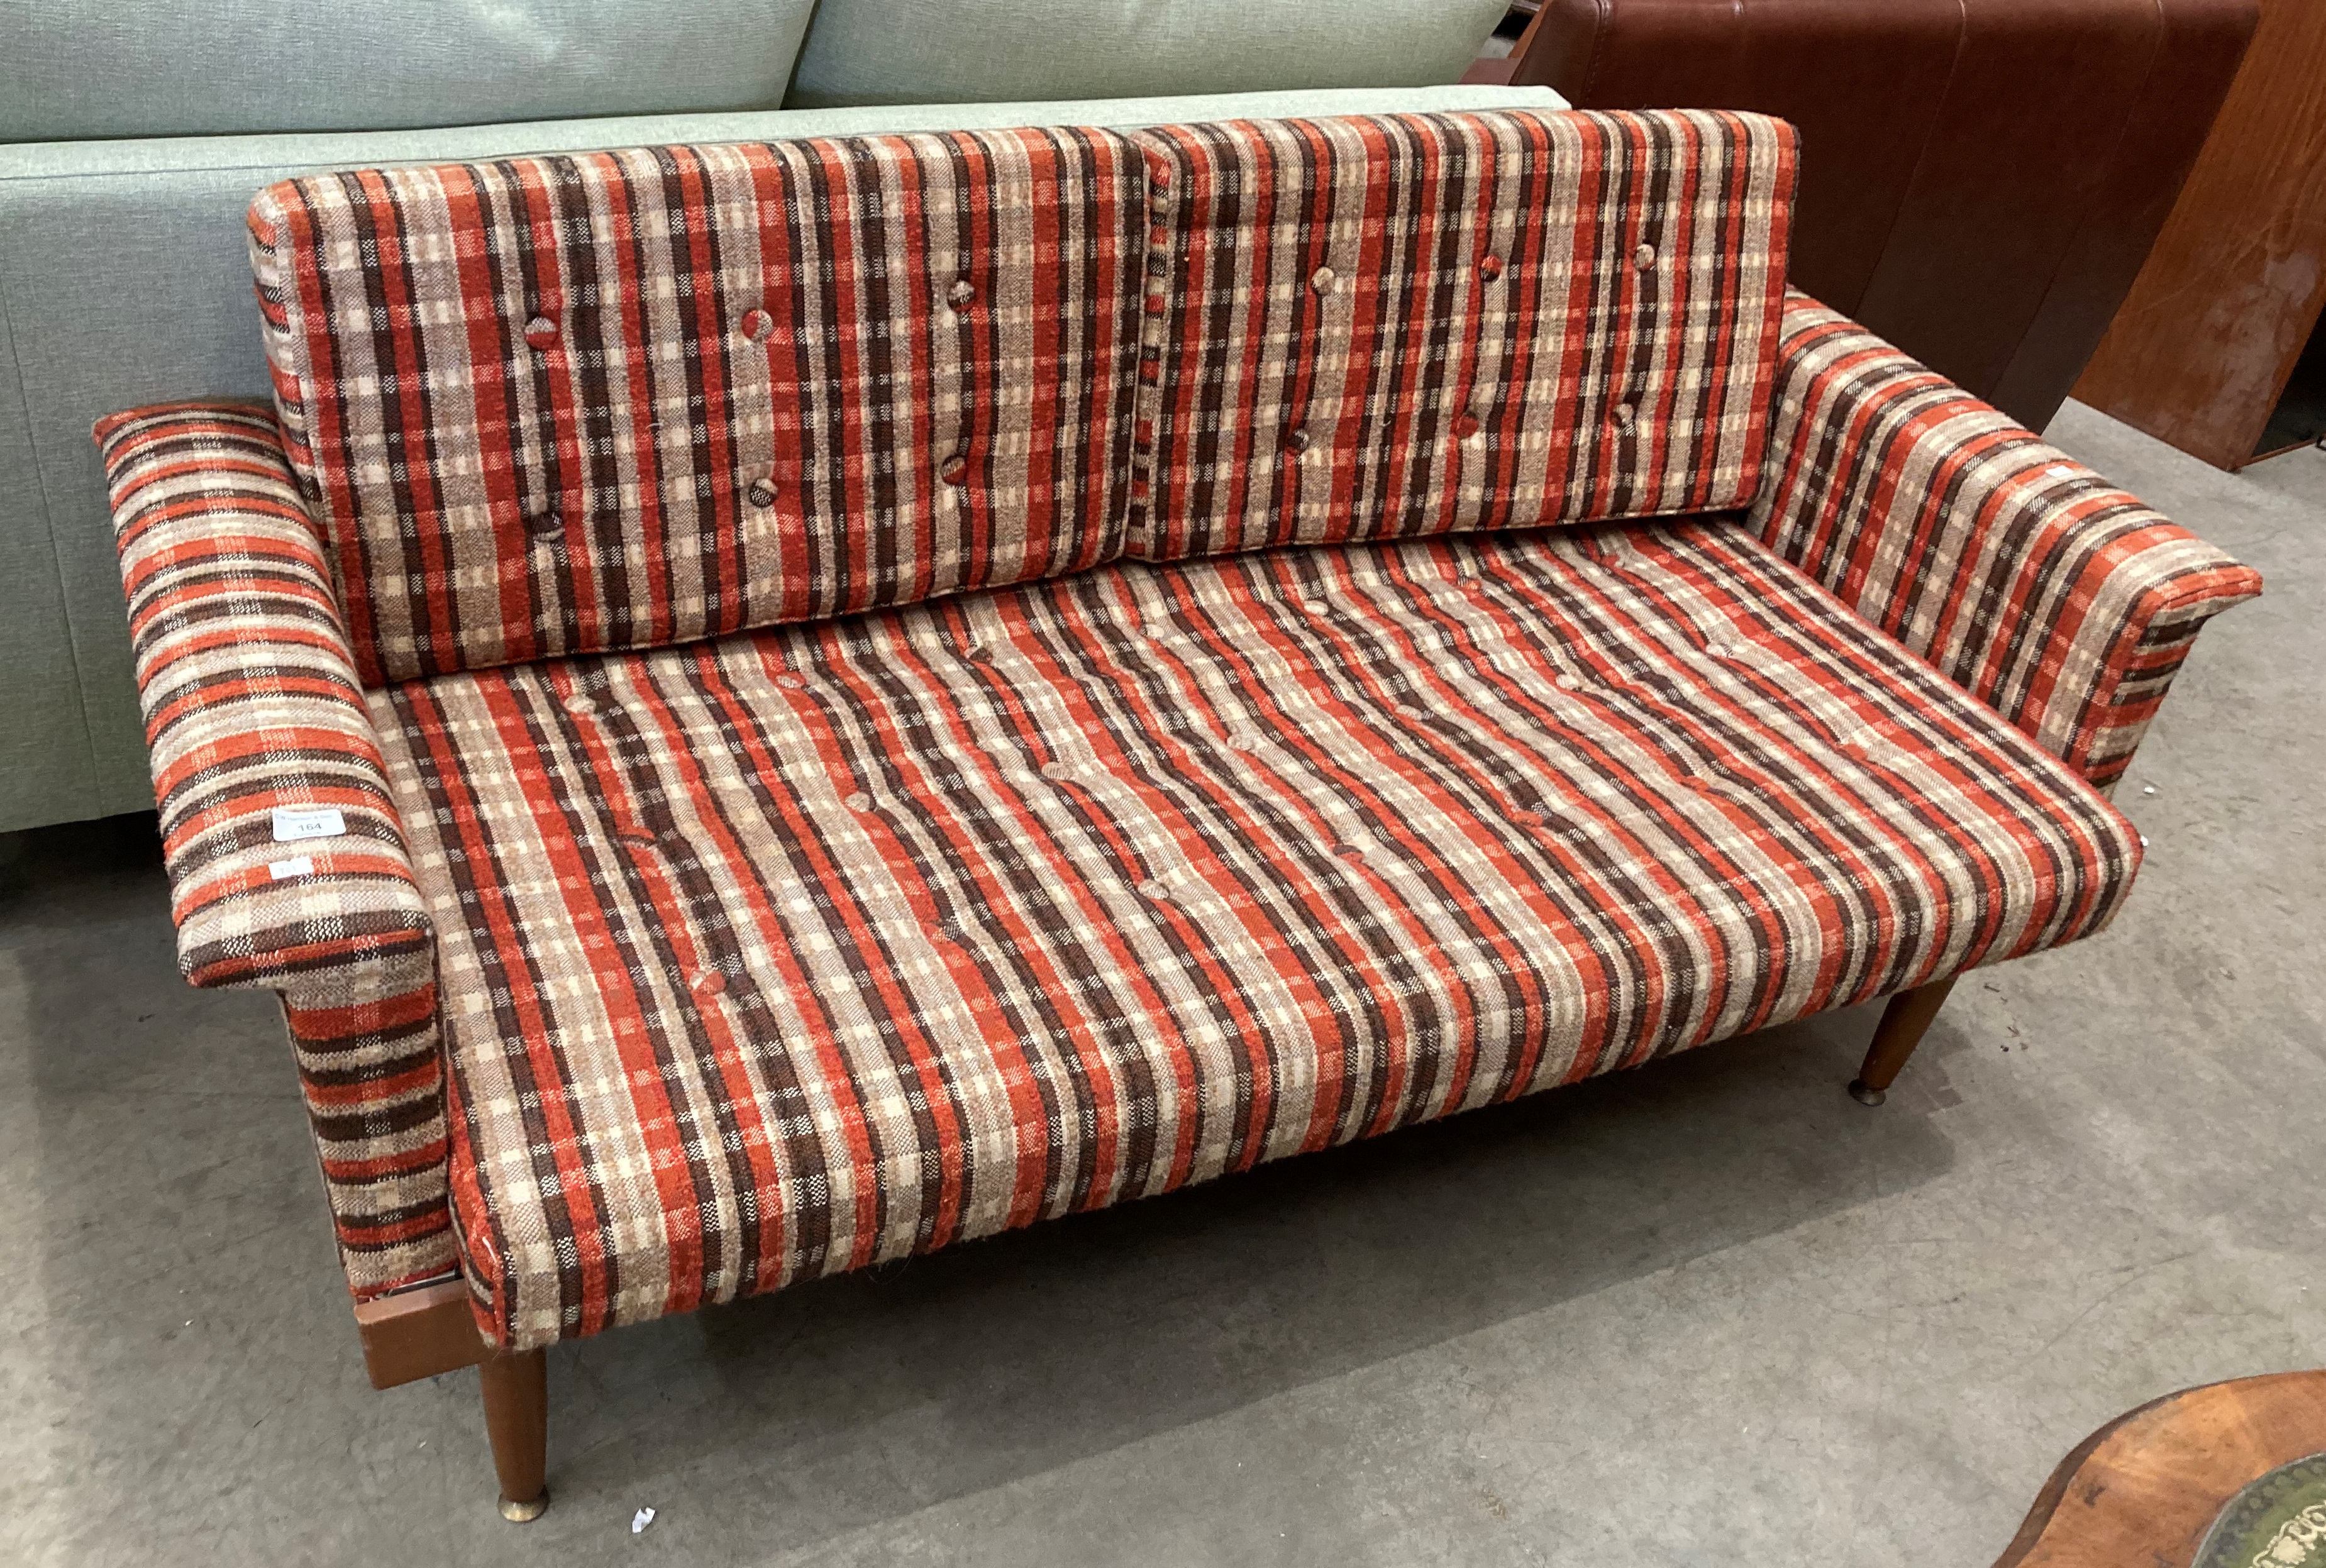 A mid Twentieth Century teak framed bed settee with brown/red and ivory patterned upholstery - - Image 2 of 4